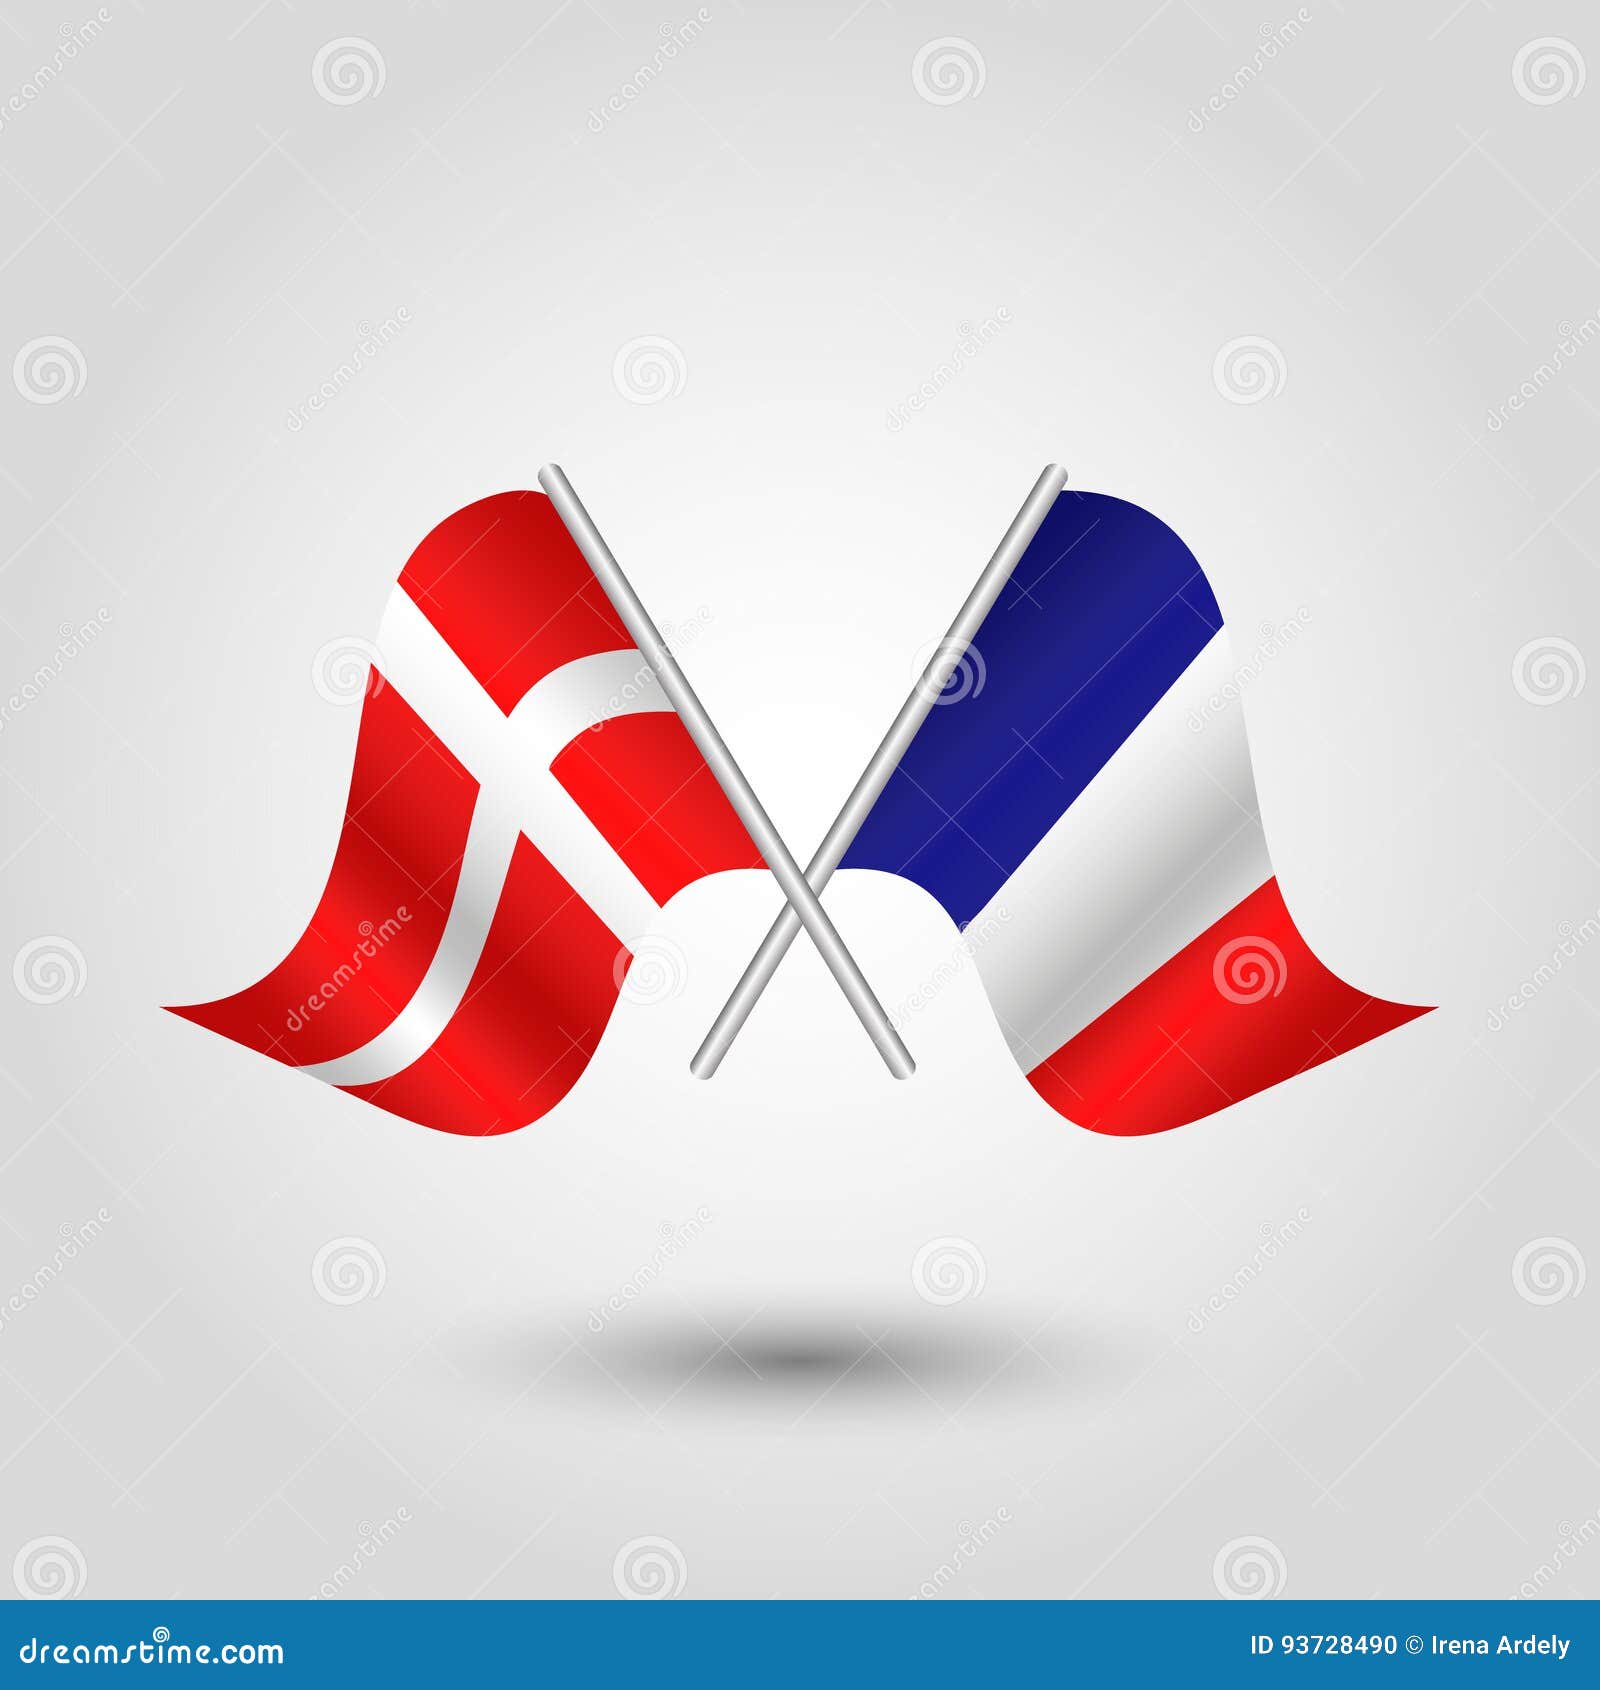 Vector Crossed Danish And French Flags On Silver Sticks Symbol Of Denmark And France Stock Vector Illustration Of Metal Match